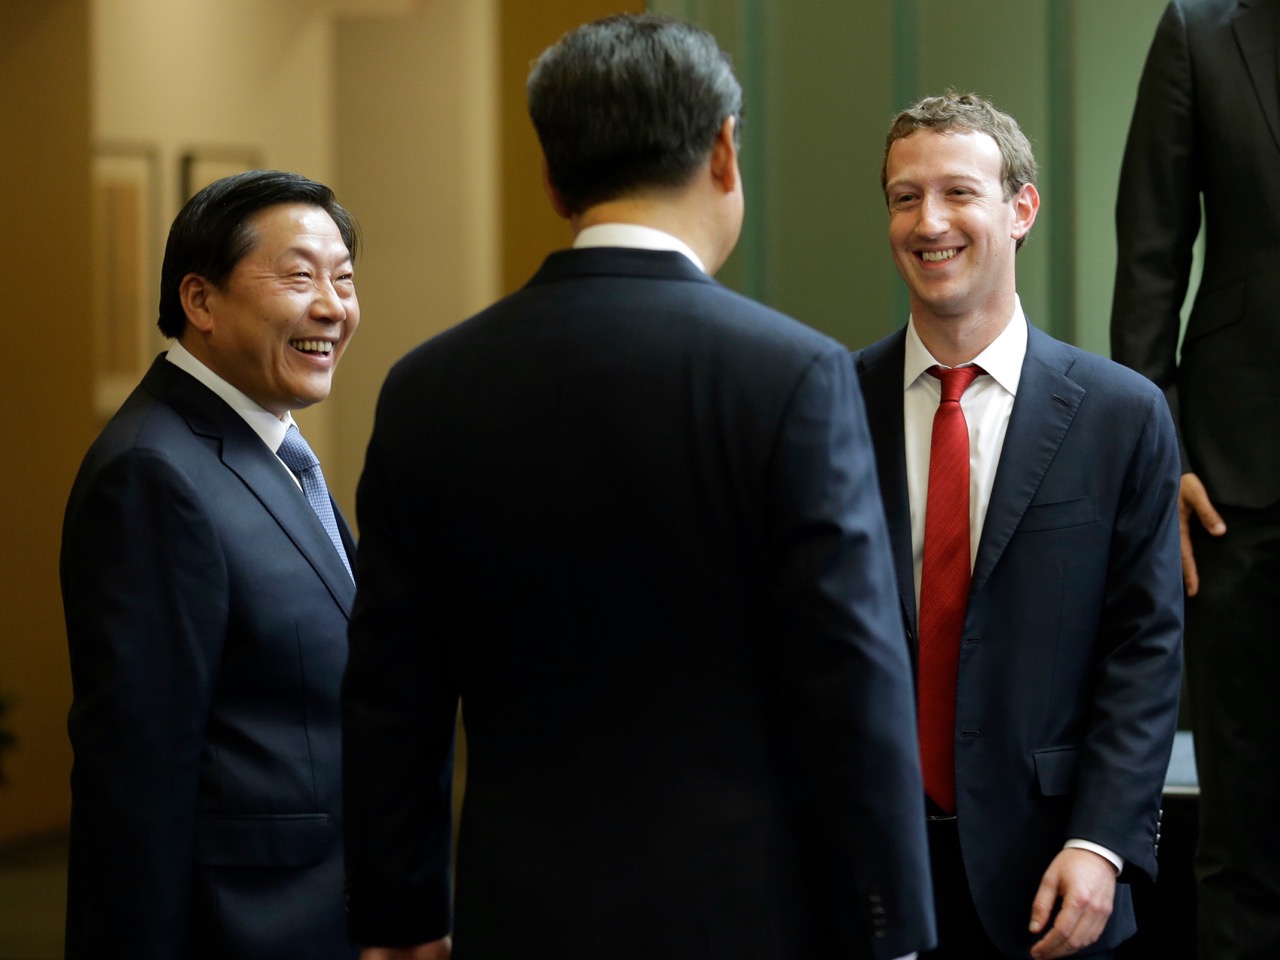 In this 23 Sept. 2015 file photo, Chinese President Xi Jinping, center, talks with Facebook Chief Executive Mark Zuckerberg, right, as Lu Wei, left, China's Internet czar, looks on during a gathering of CEOs and other executives at Microsoft's main campus in Redmond, Washington